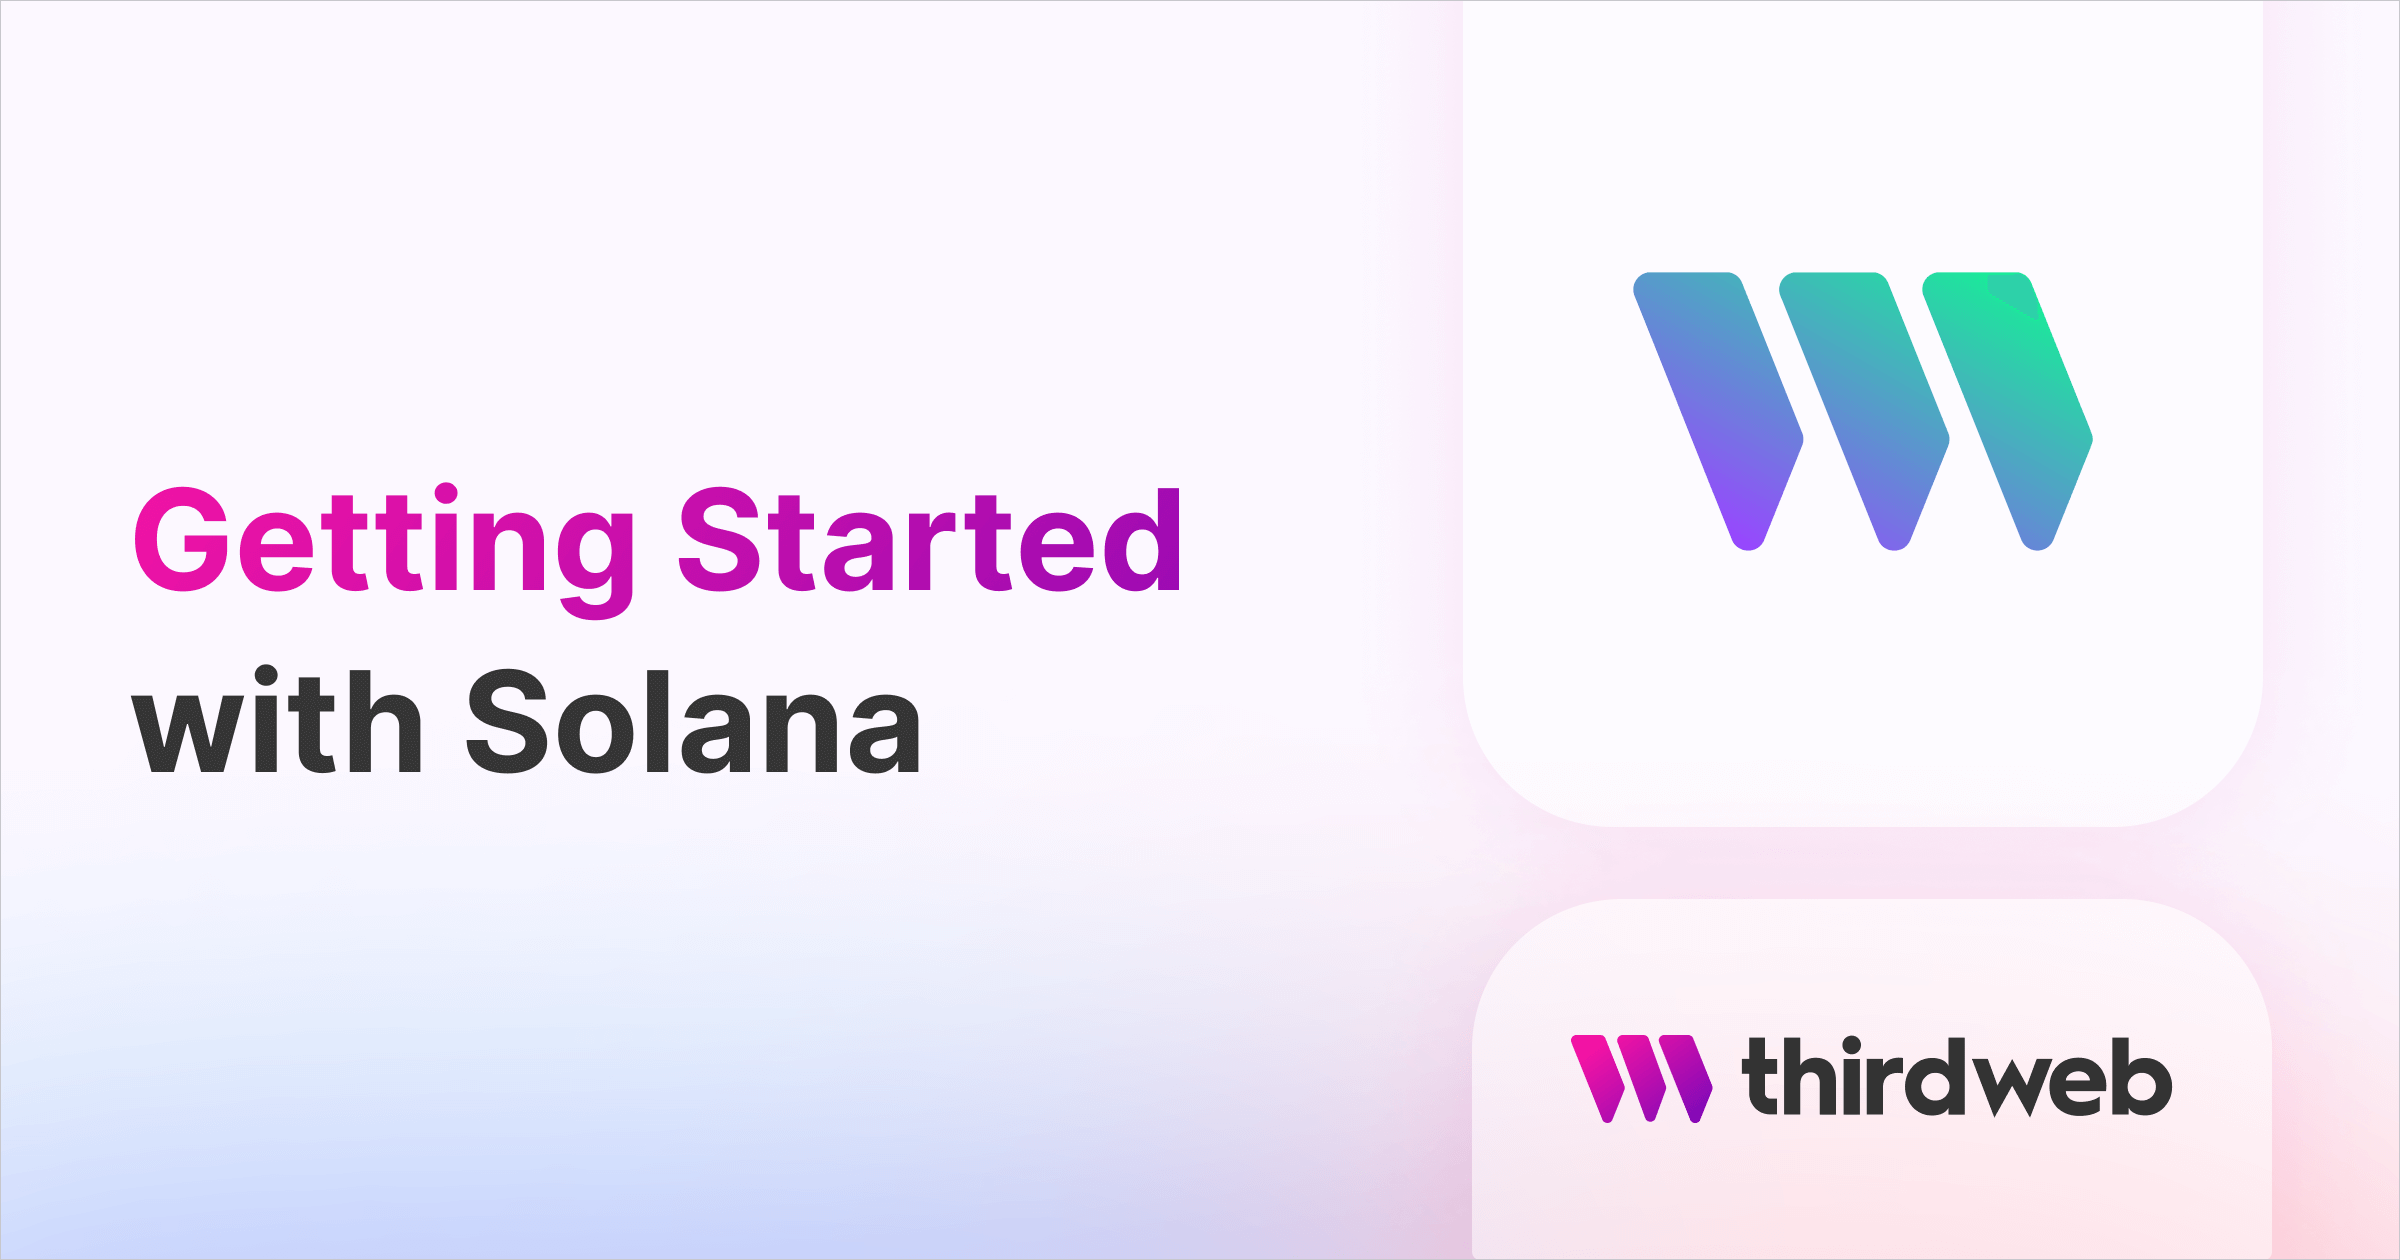 Getting Started with Solana: How to Create a Phantom Wallet & Get Devnet Tokens - thirdweb Guides